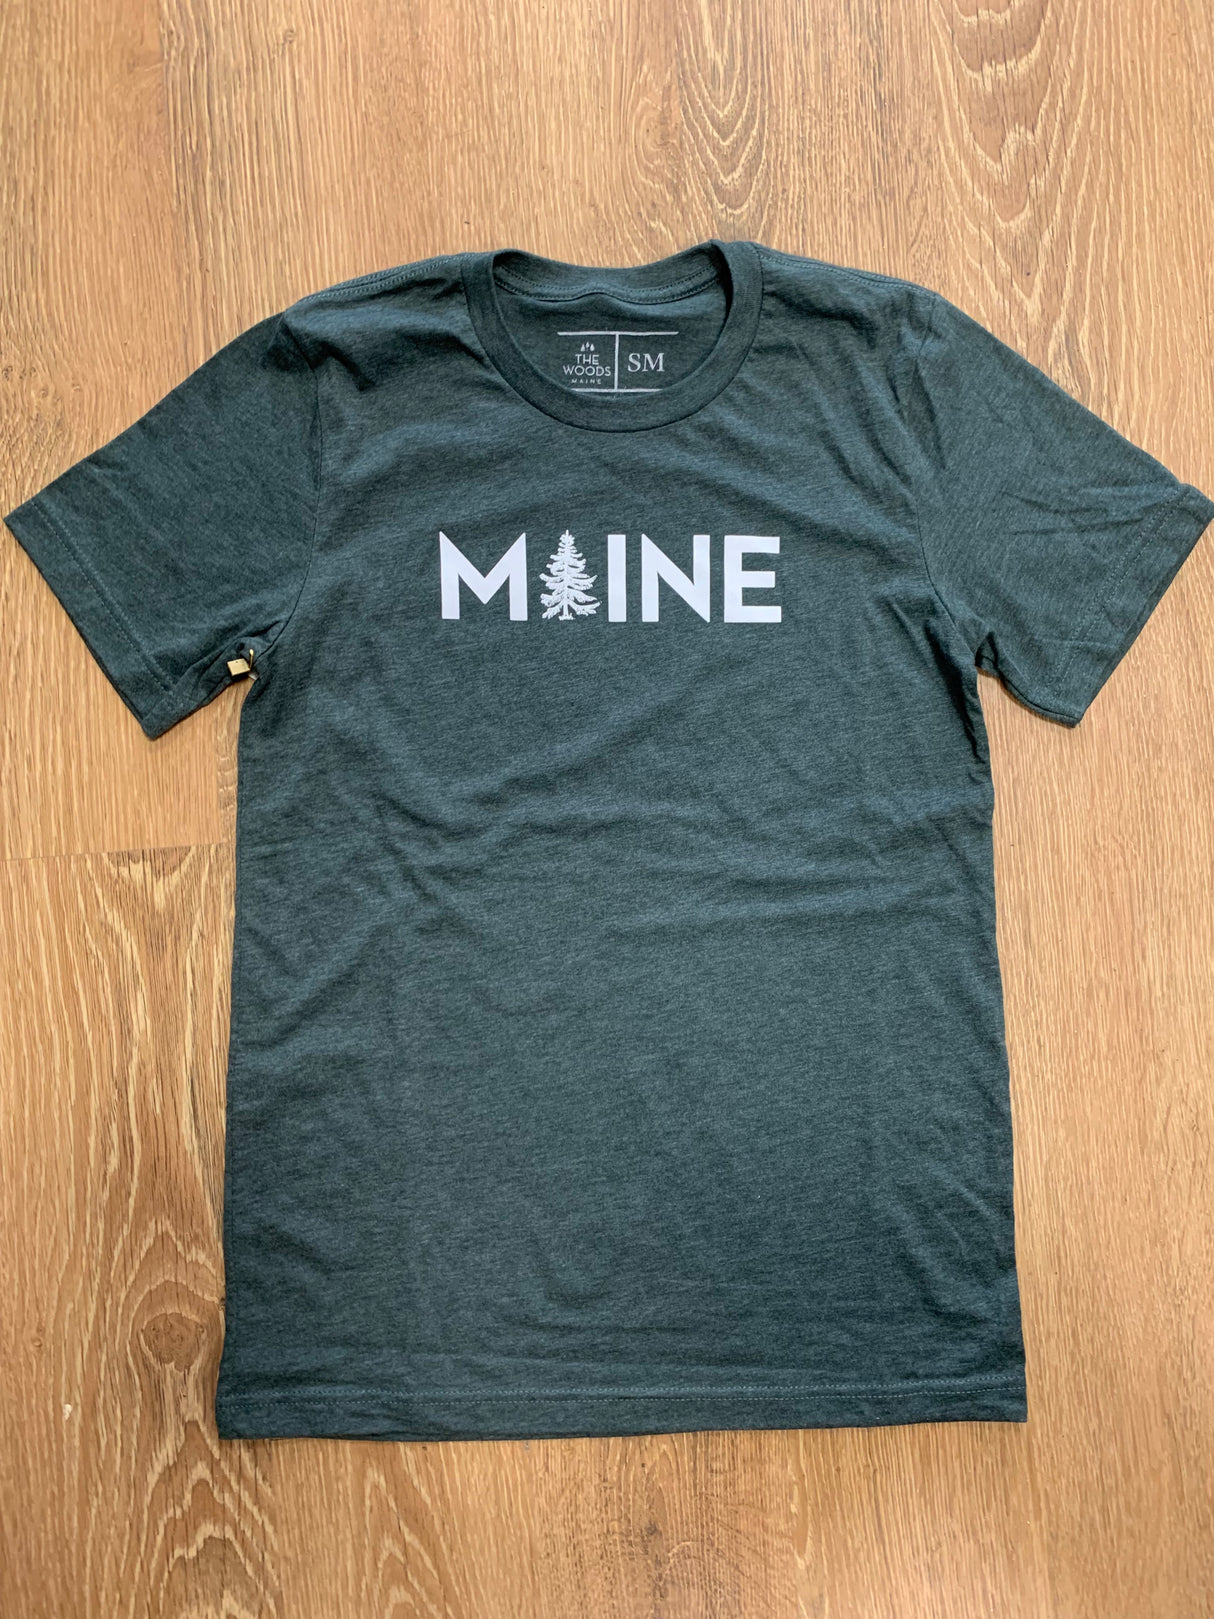 My Maine: Adult Maine Short Sleeve T-Shirt (Available in two colors)